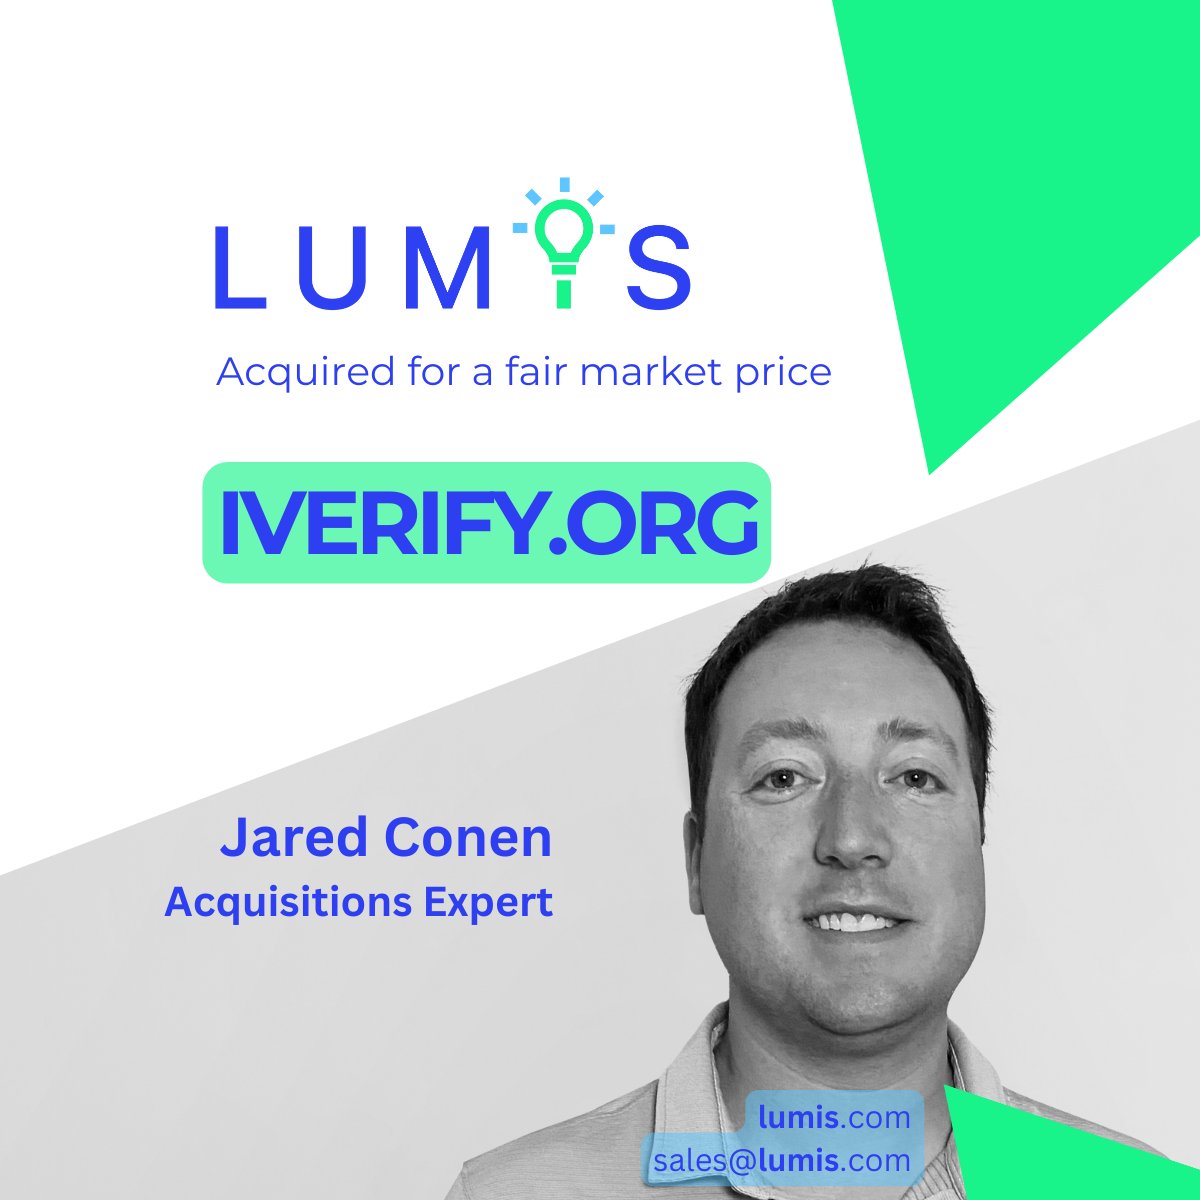 iVerify.org has been acquired. 

#Lumis